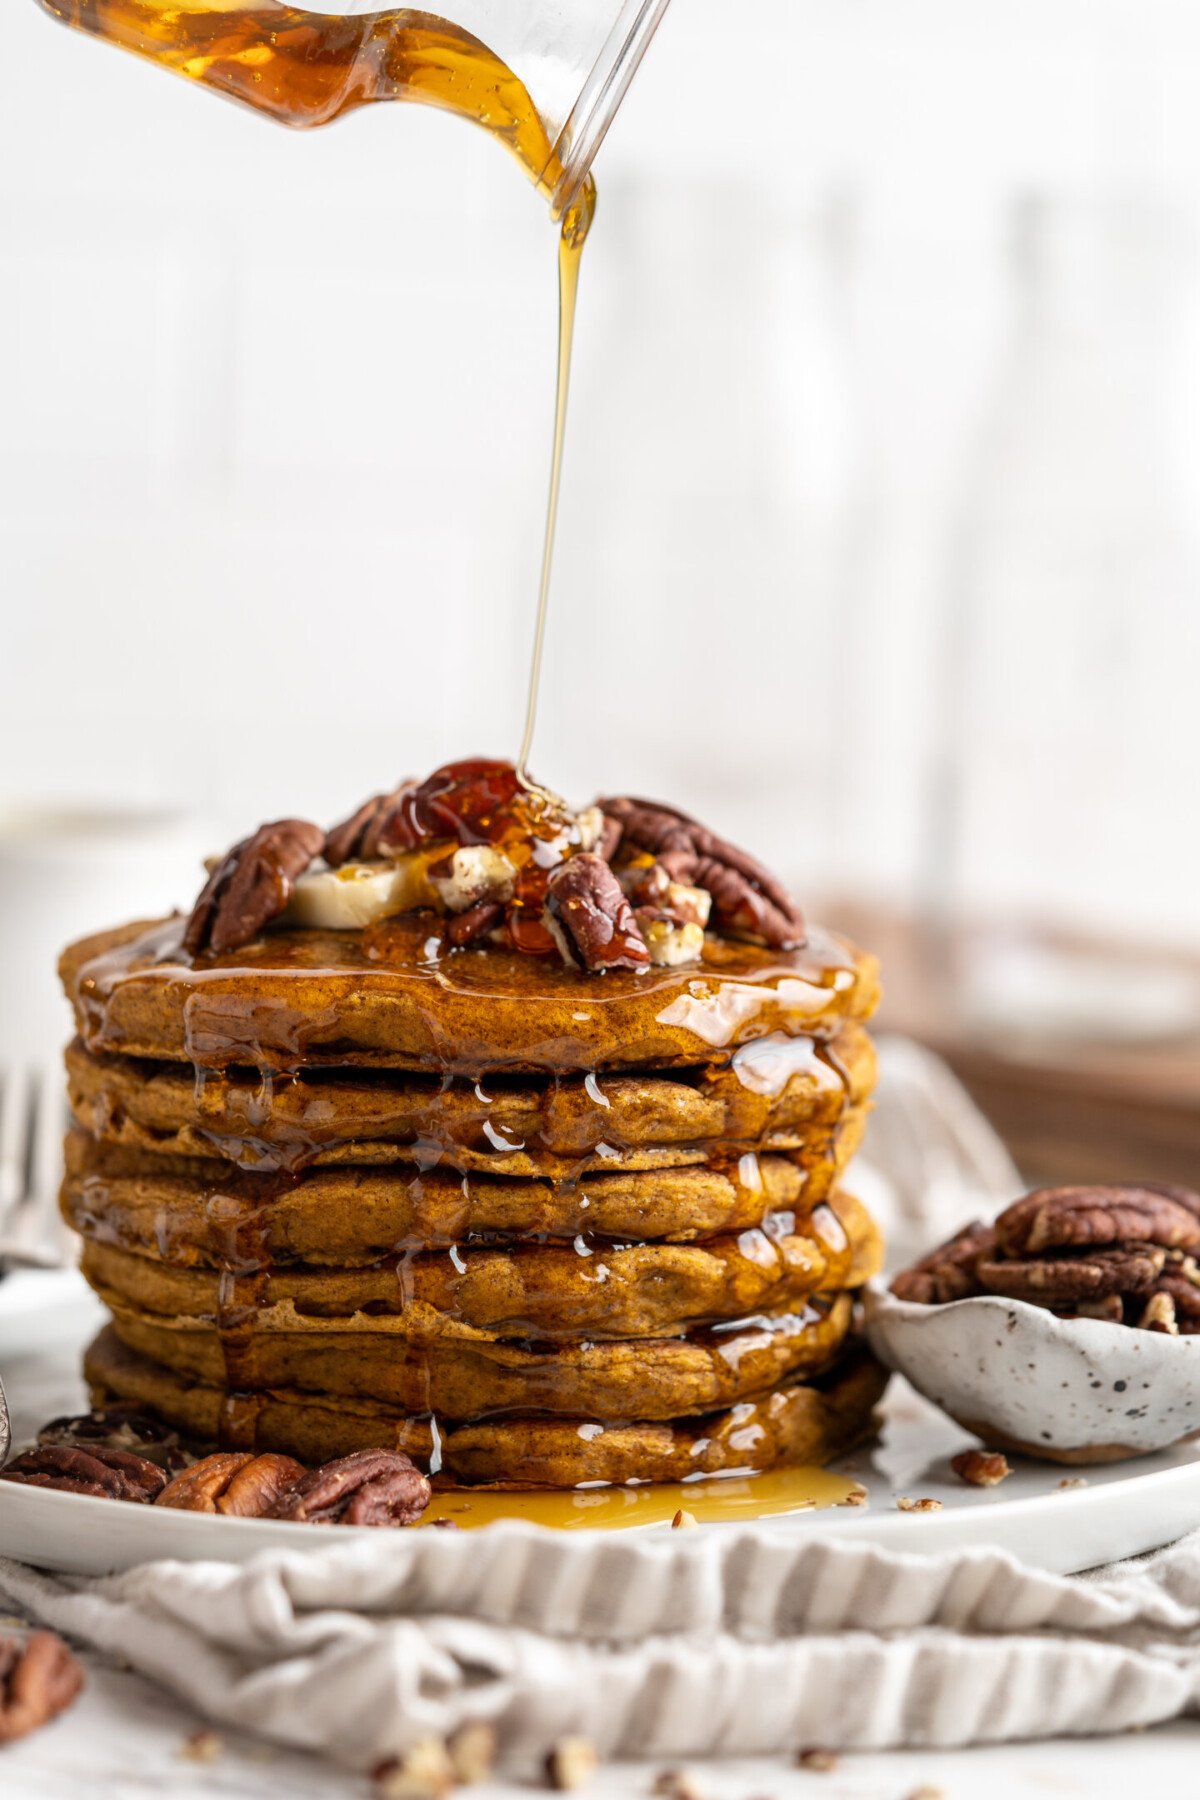 A stack of pumpkin pancakes on a plate with nuts, with syrup being poured over the top.